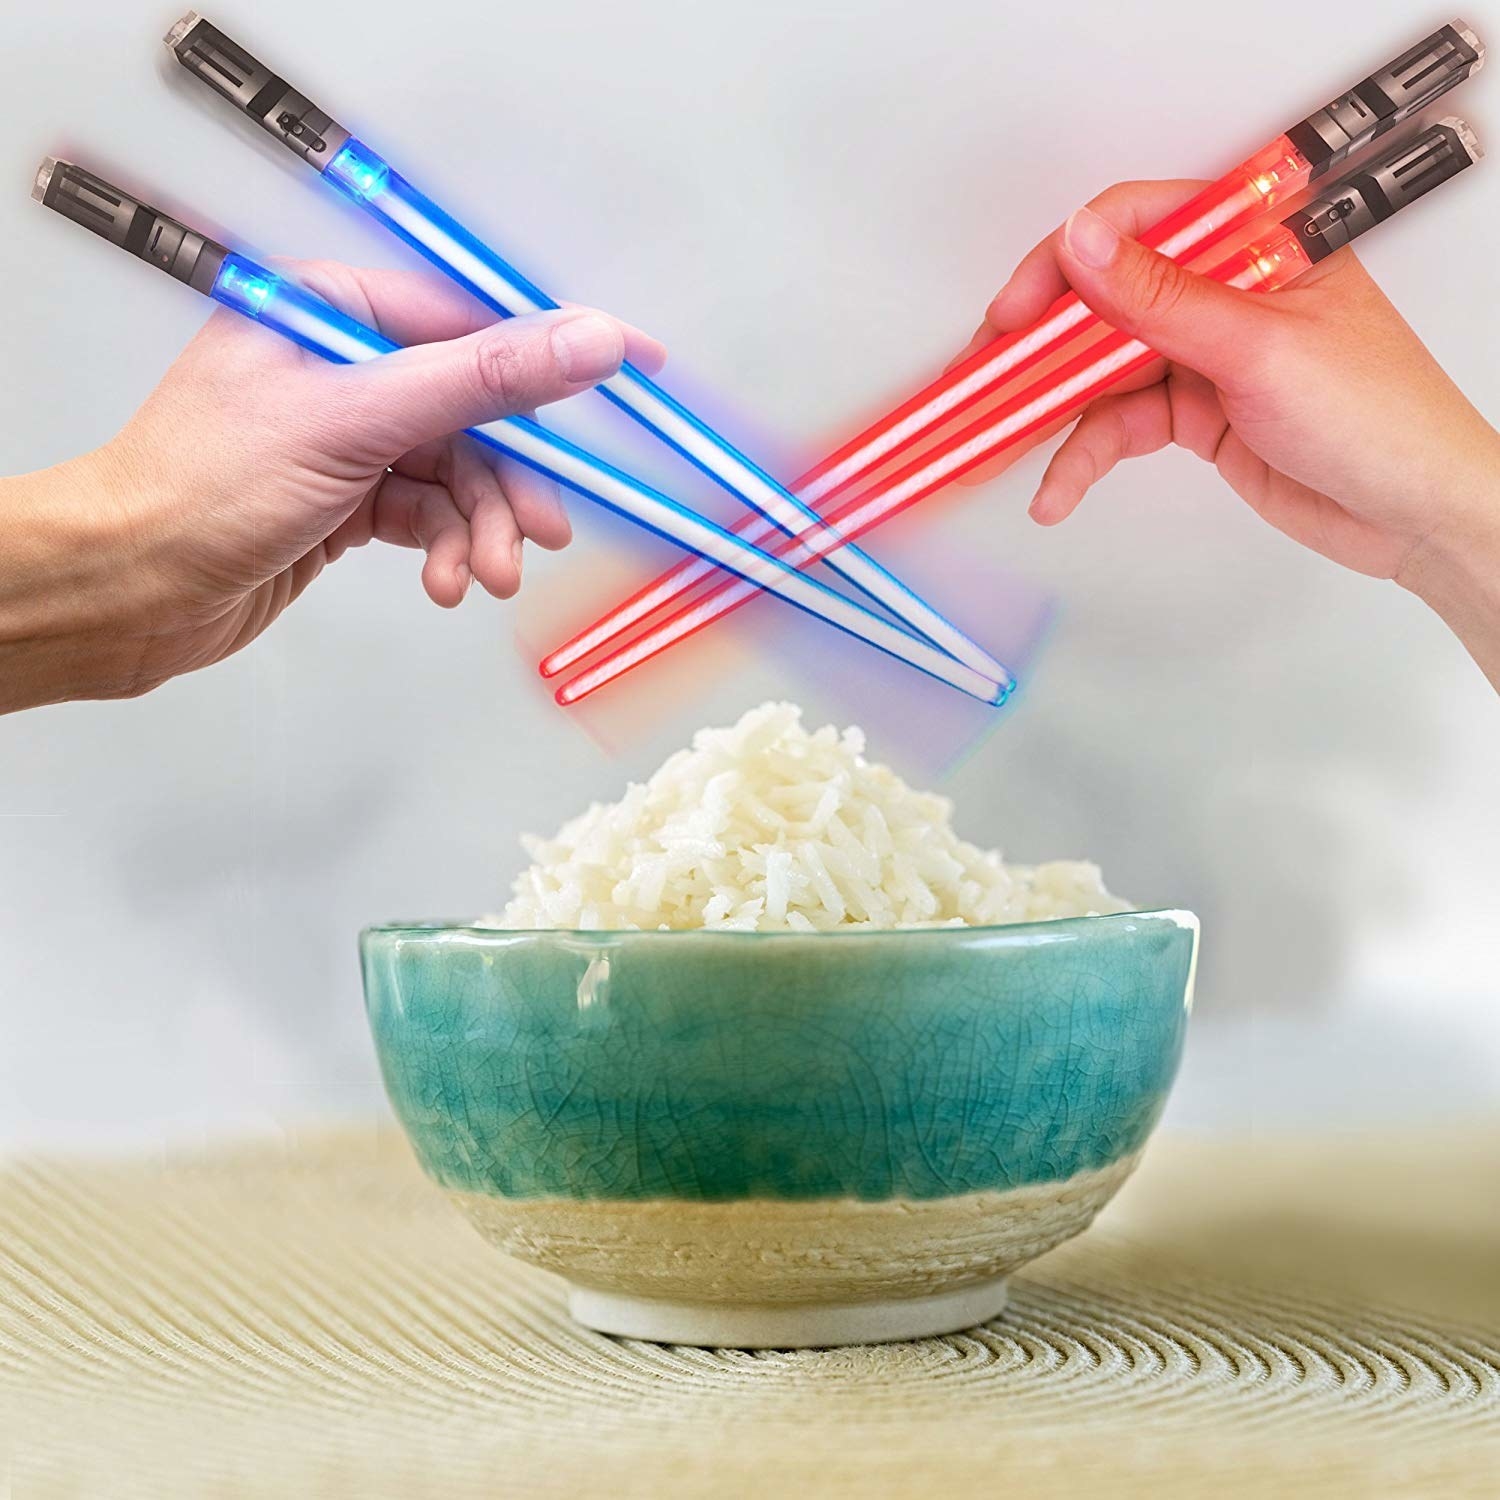 Two people holding the chopsticks over rice